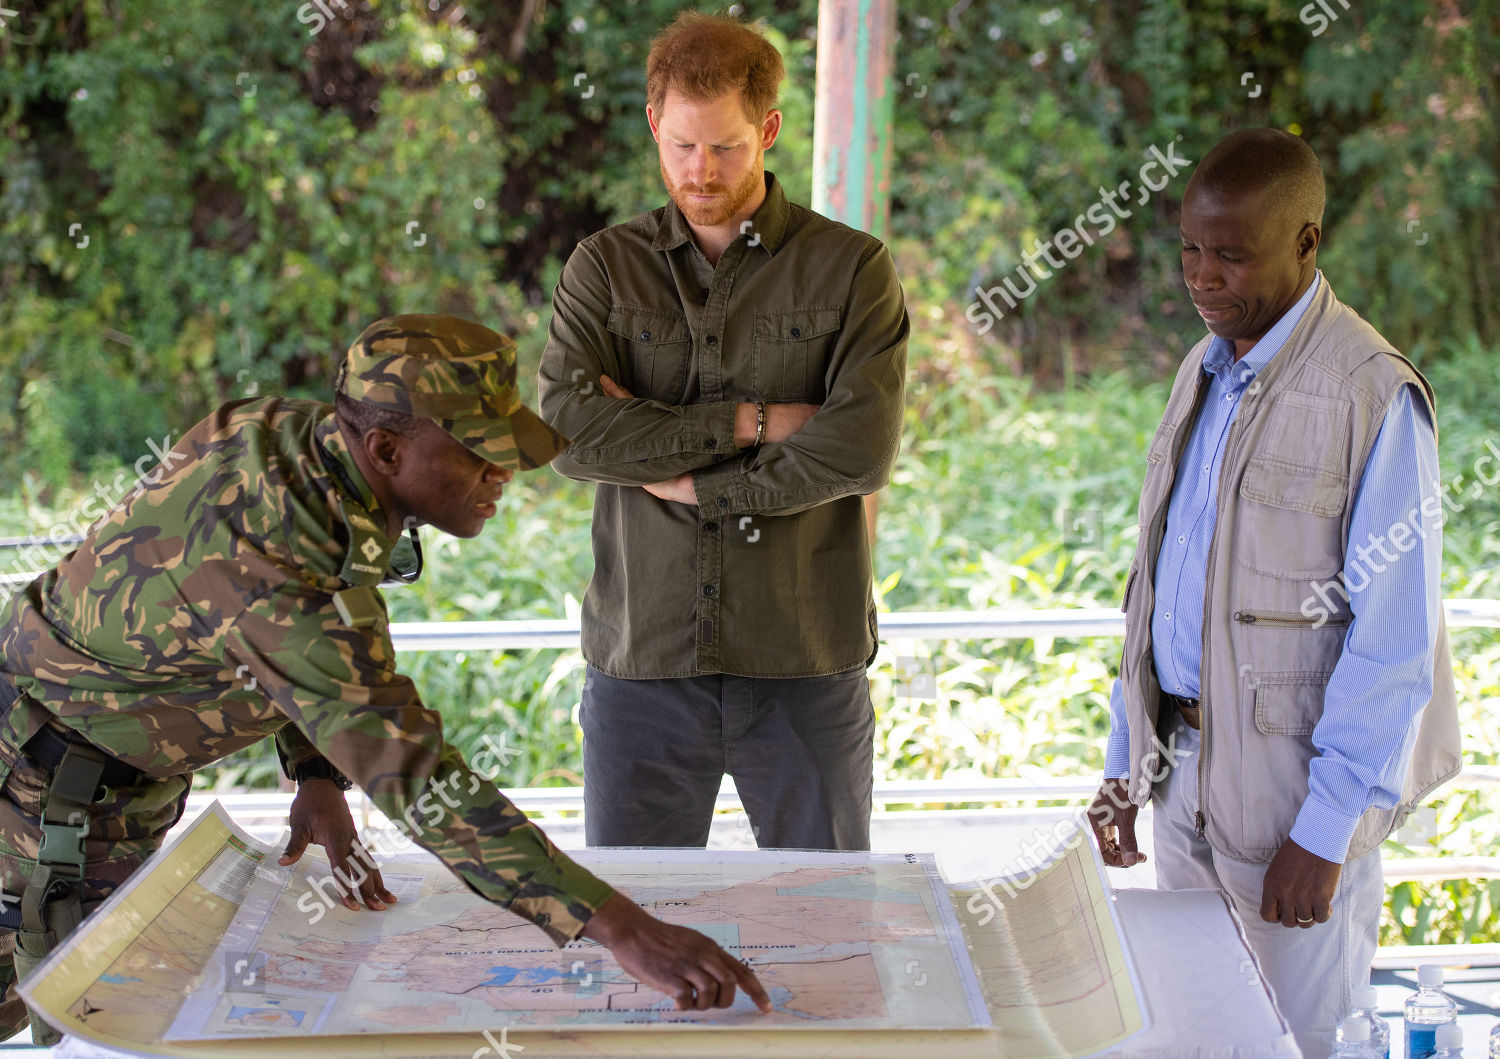 prince-harry-visit-to-africa-shutterstock-editorial-10424667p.jpg